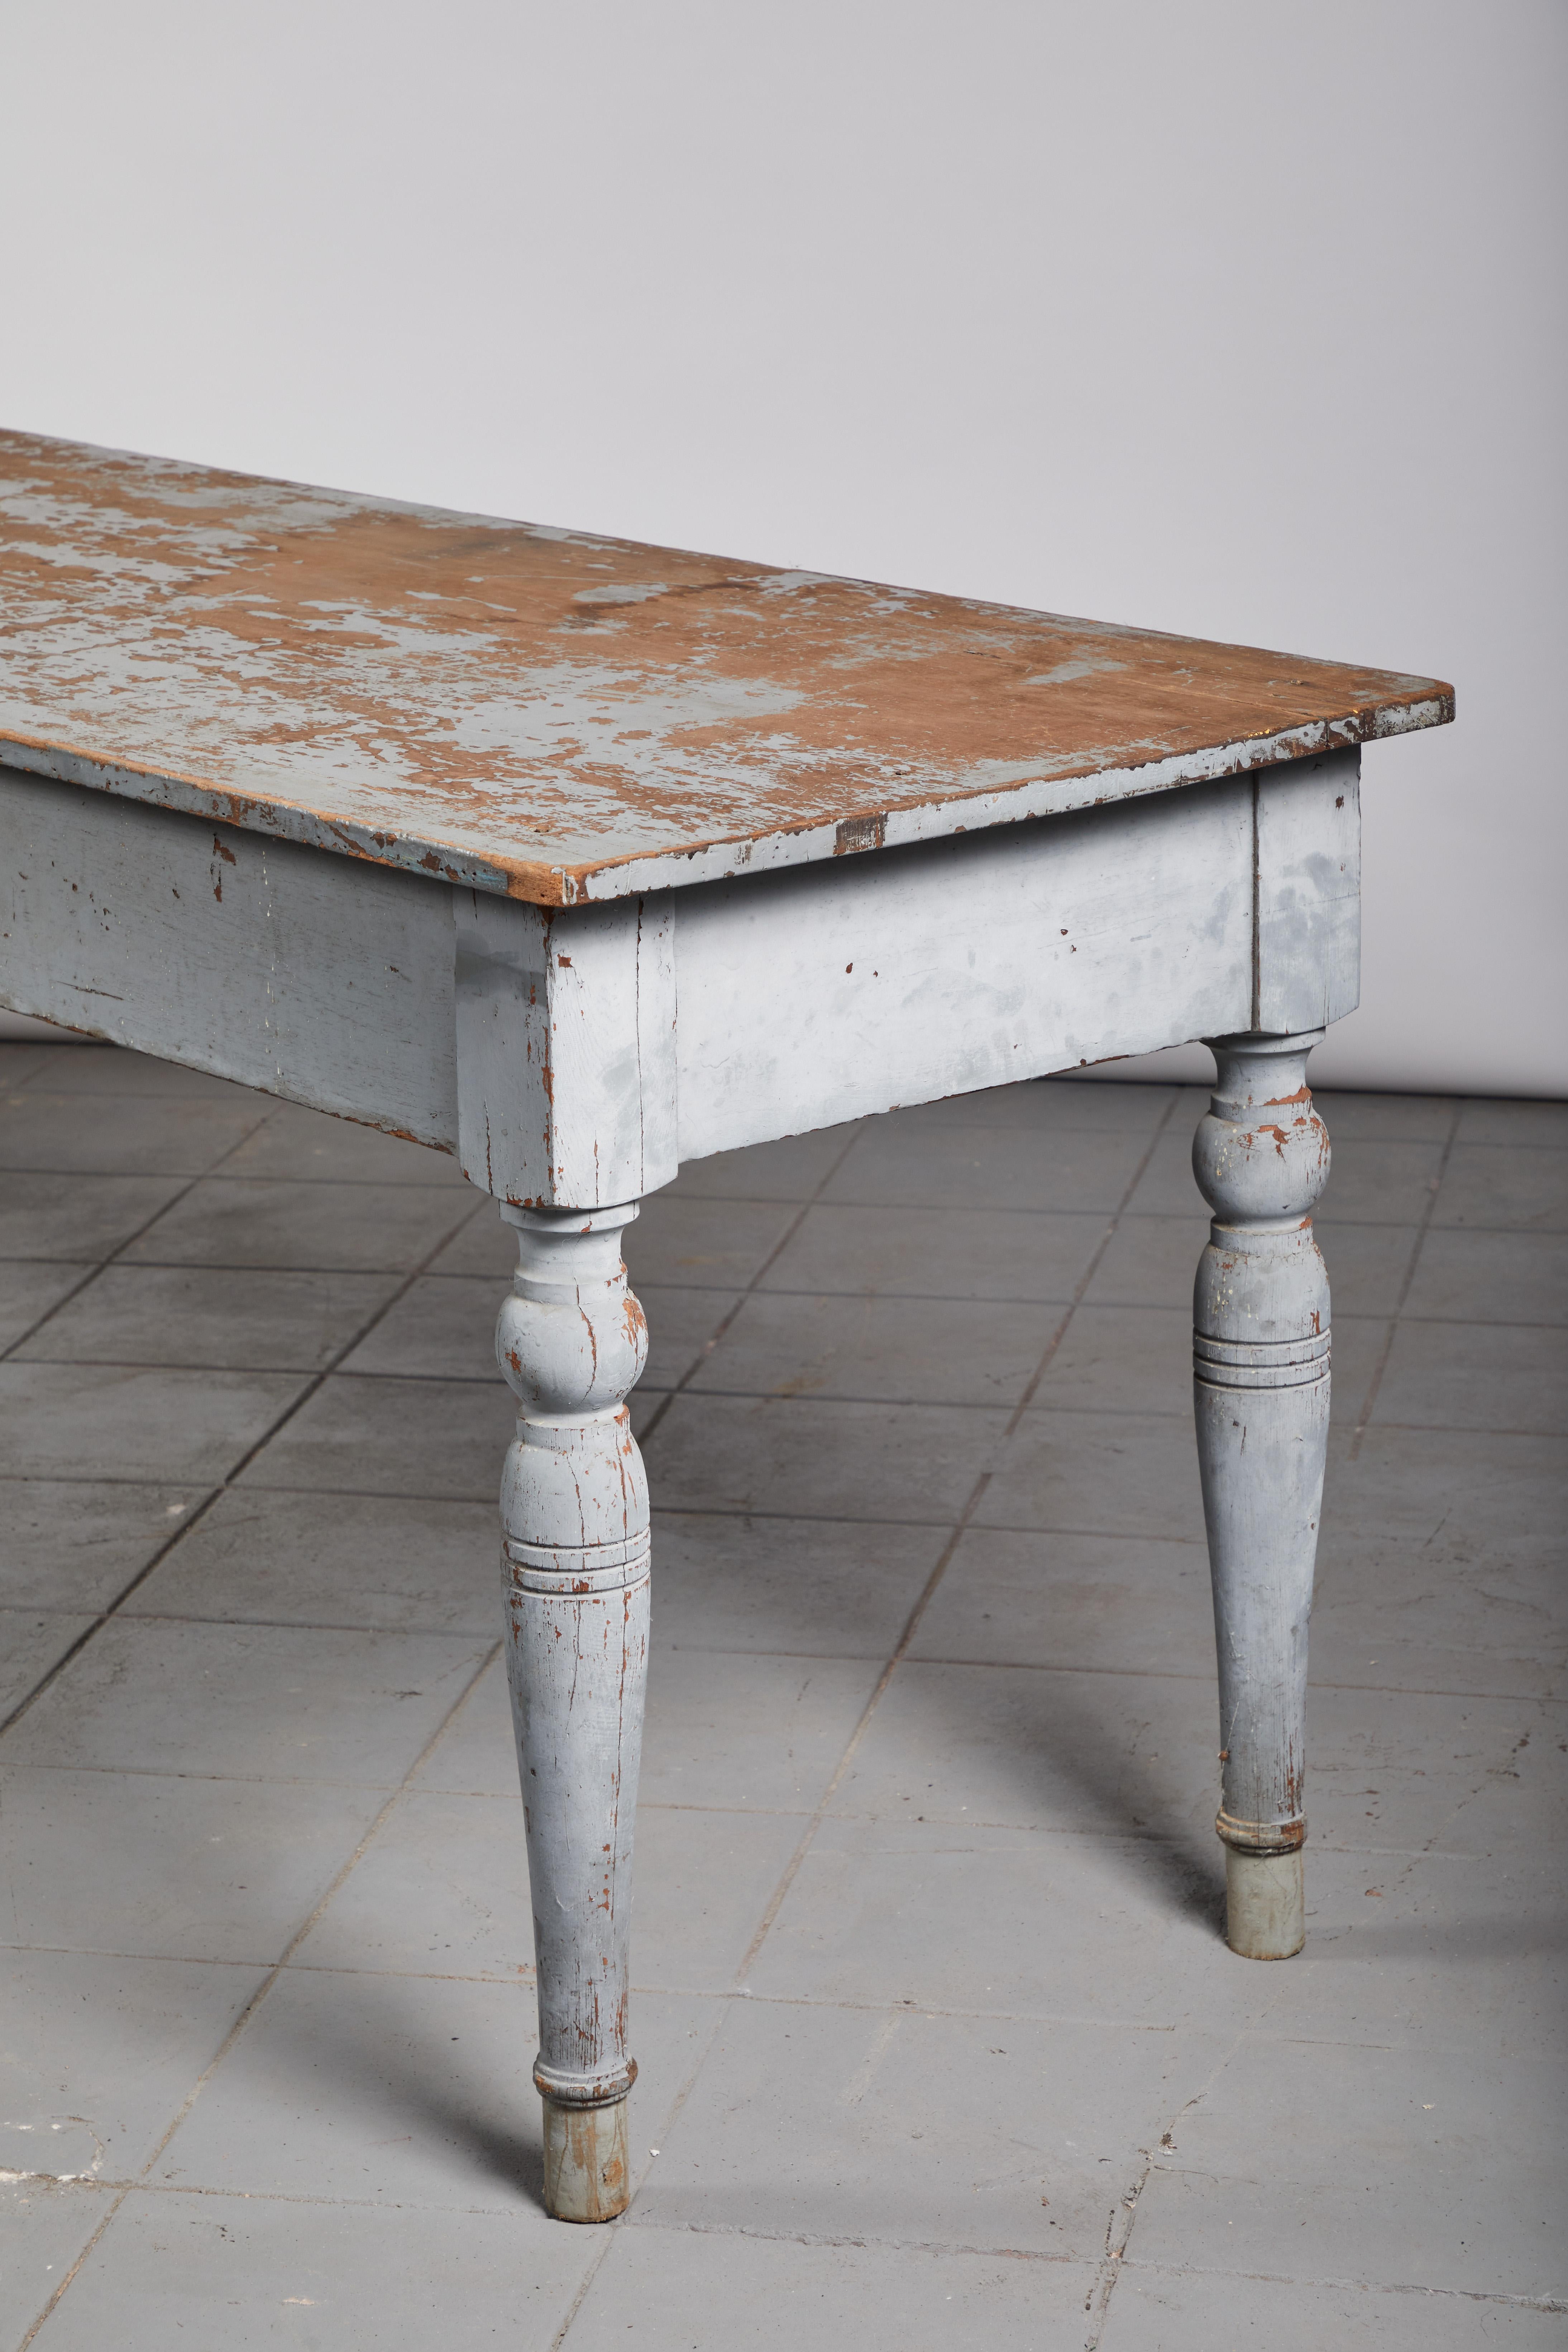 Early American rustic grey farm table with turned legs.